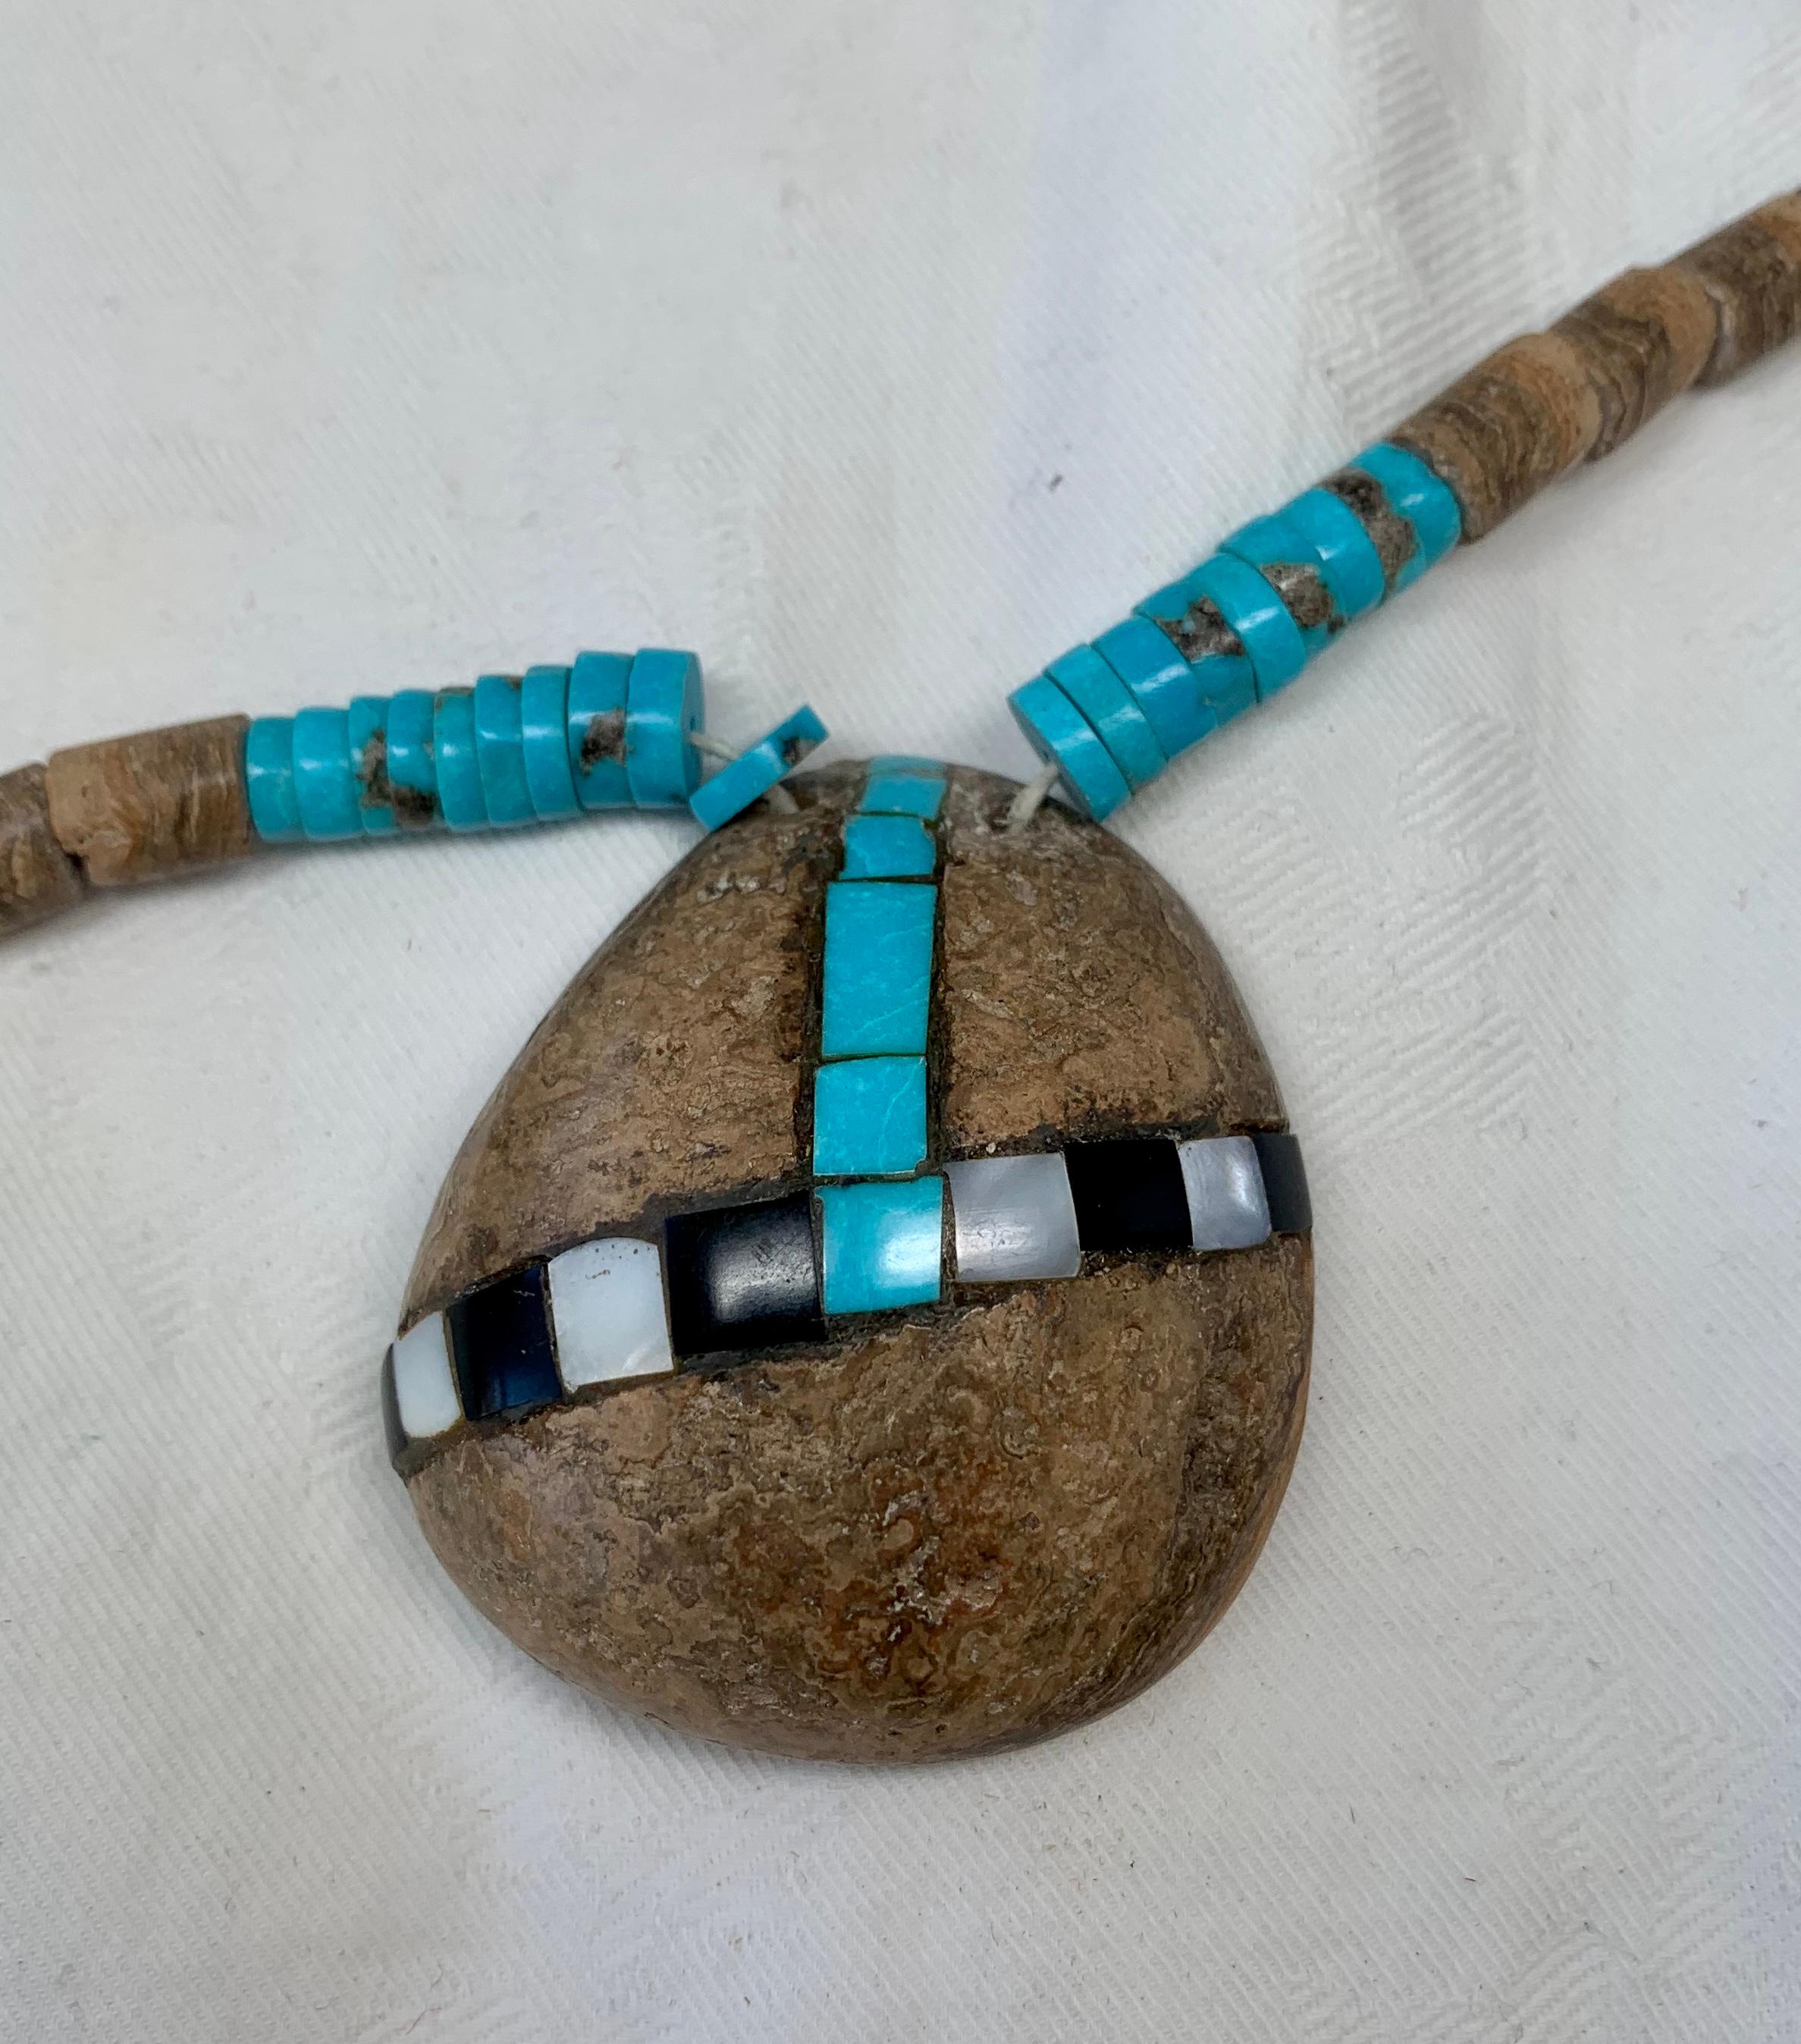 This is a fantastic, antique SANTO DOMINGO Kewa Pueblo necklace.  The piece is very rare and special as it is made with a Petrified Shell pendant instead of the typical shell. This piece consists of a large petrified shell pendant which is inlaid